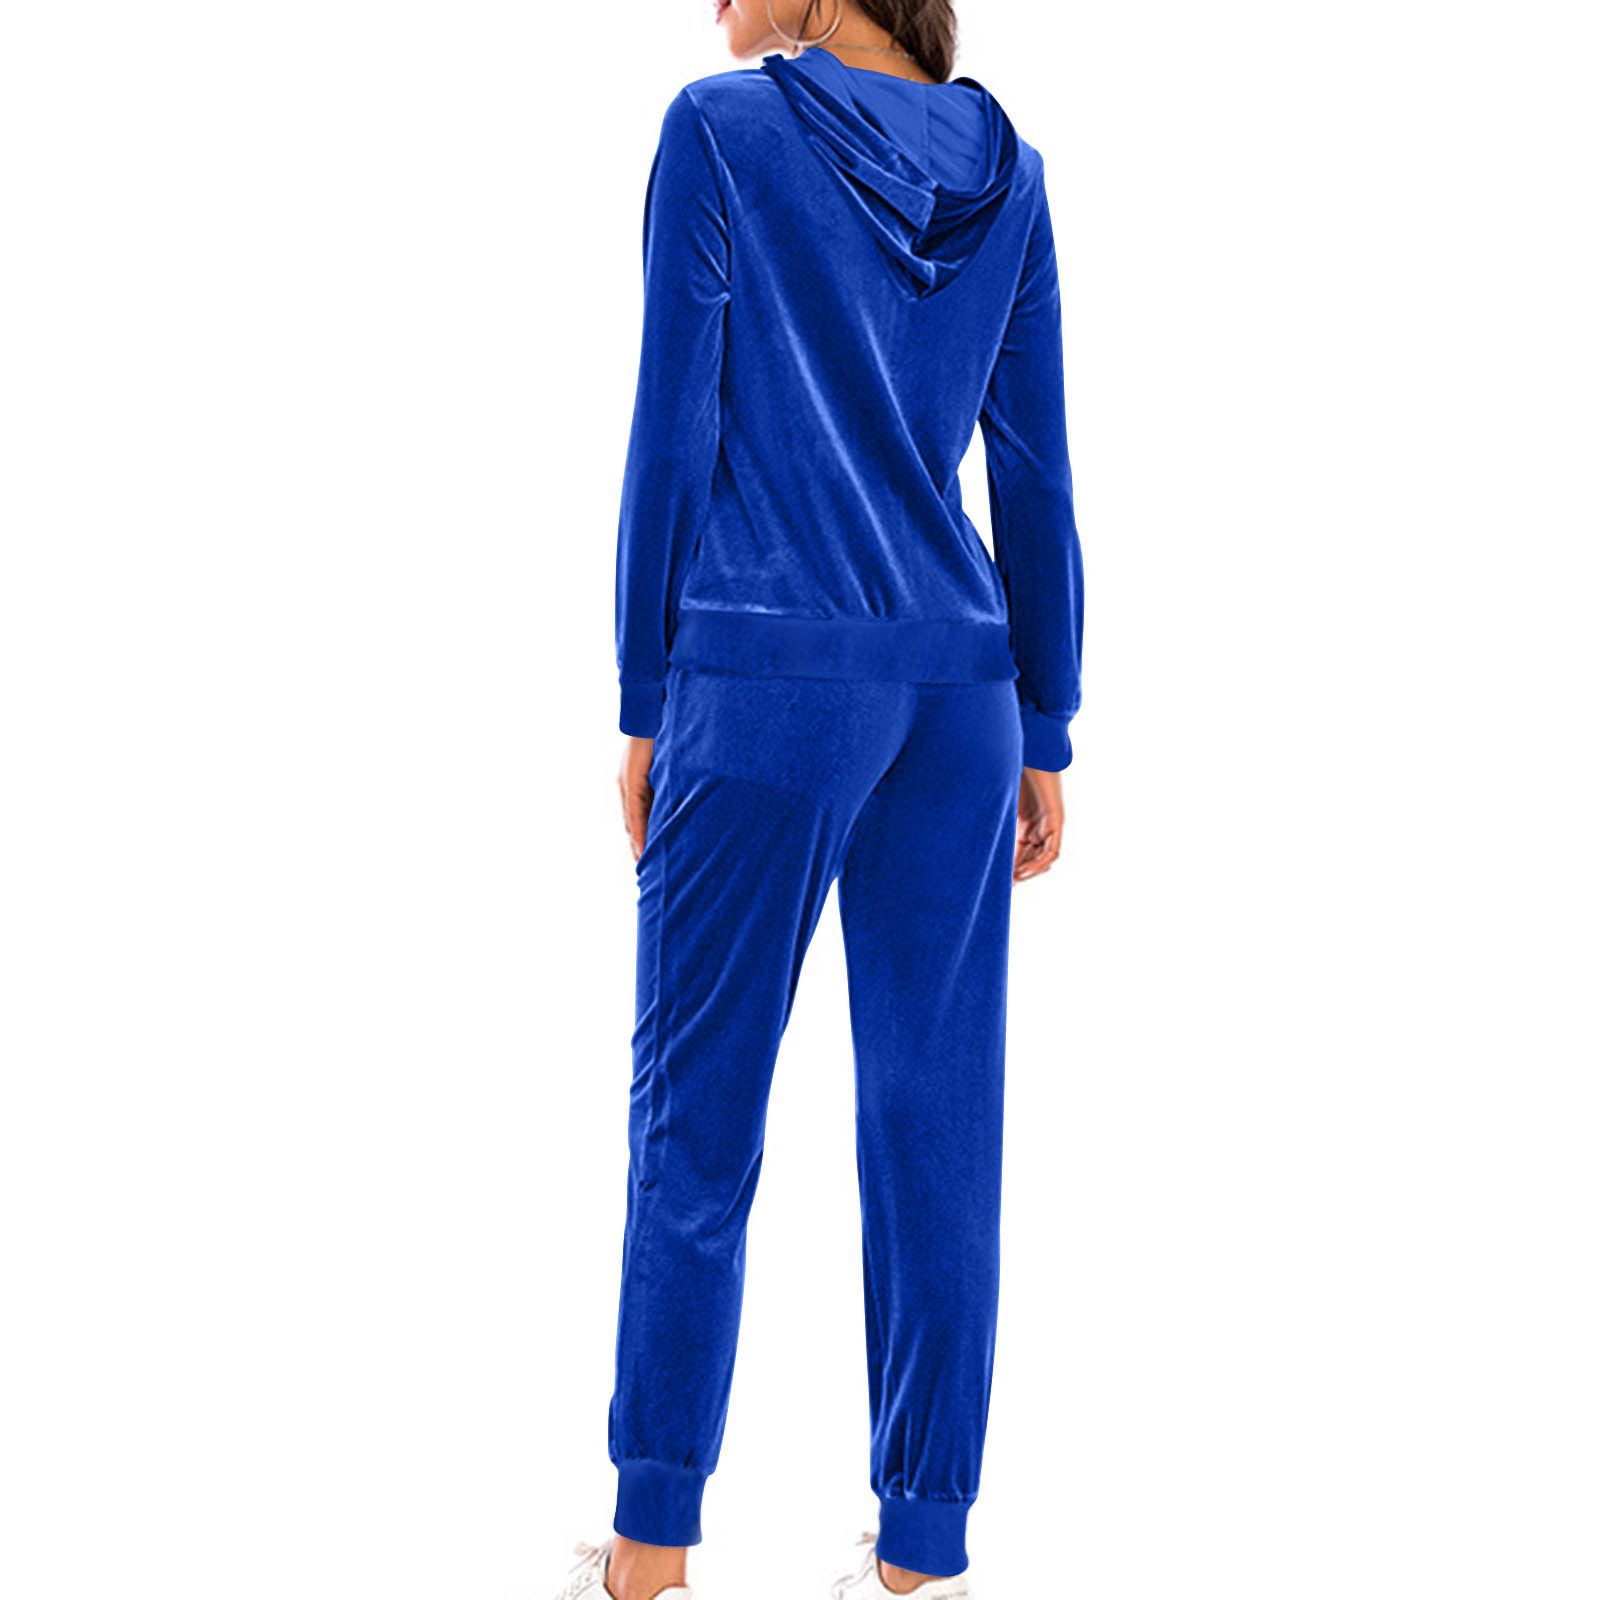 ZyeKqe Velour Sweatsuits Sets for Women Two Piece Outfit Full Zip ...